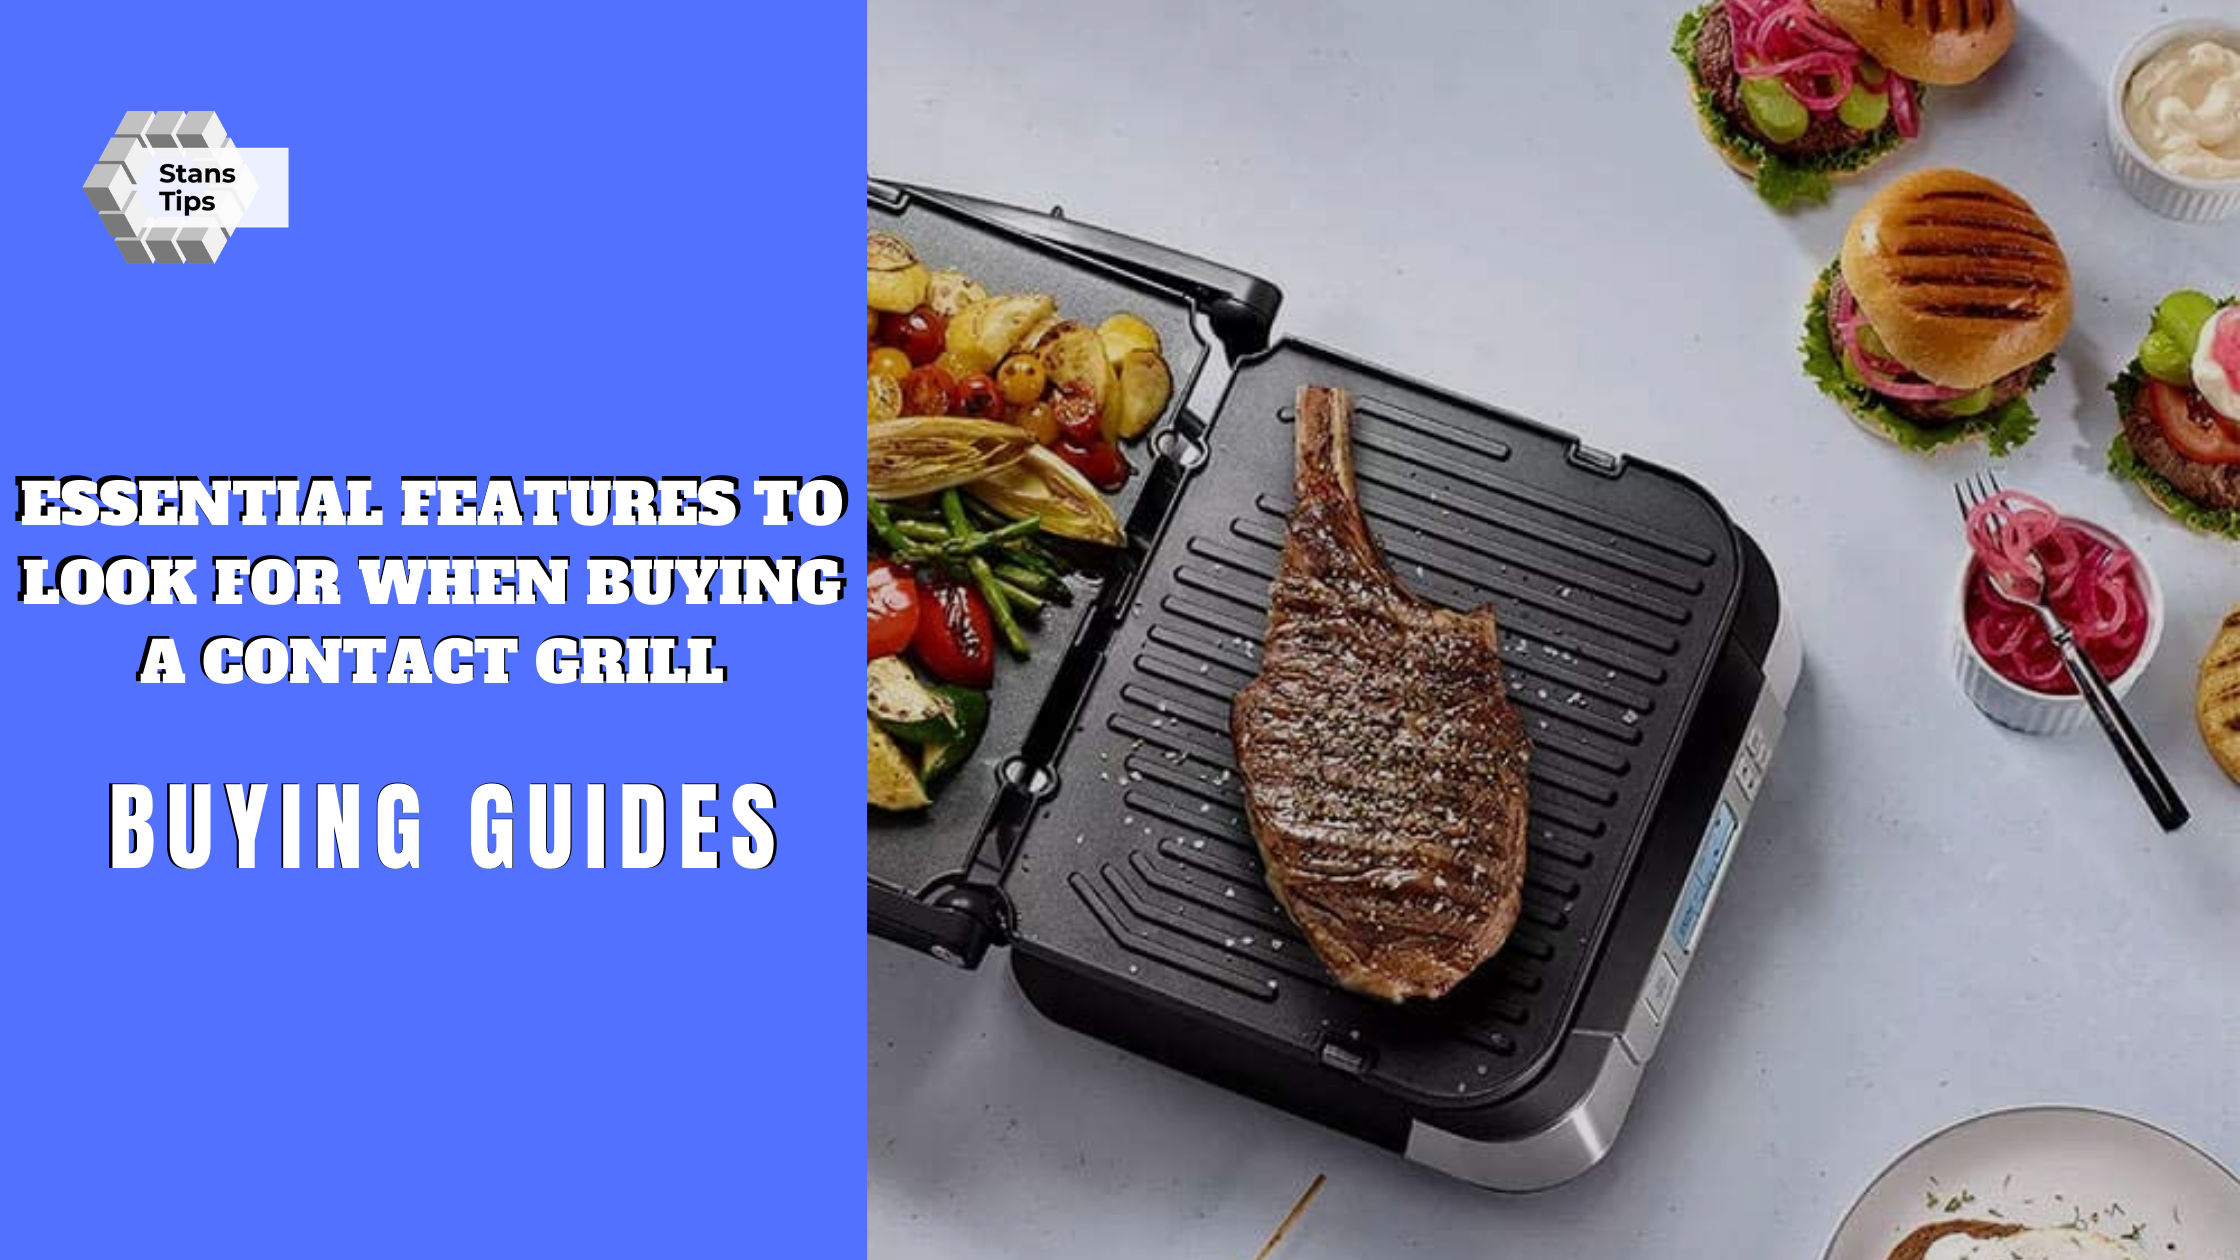 Essential features to look for when buying a contact grill in 2021